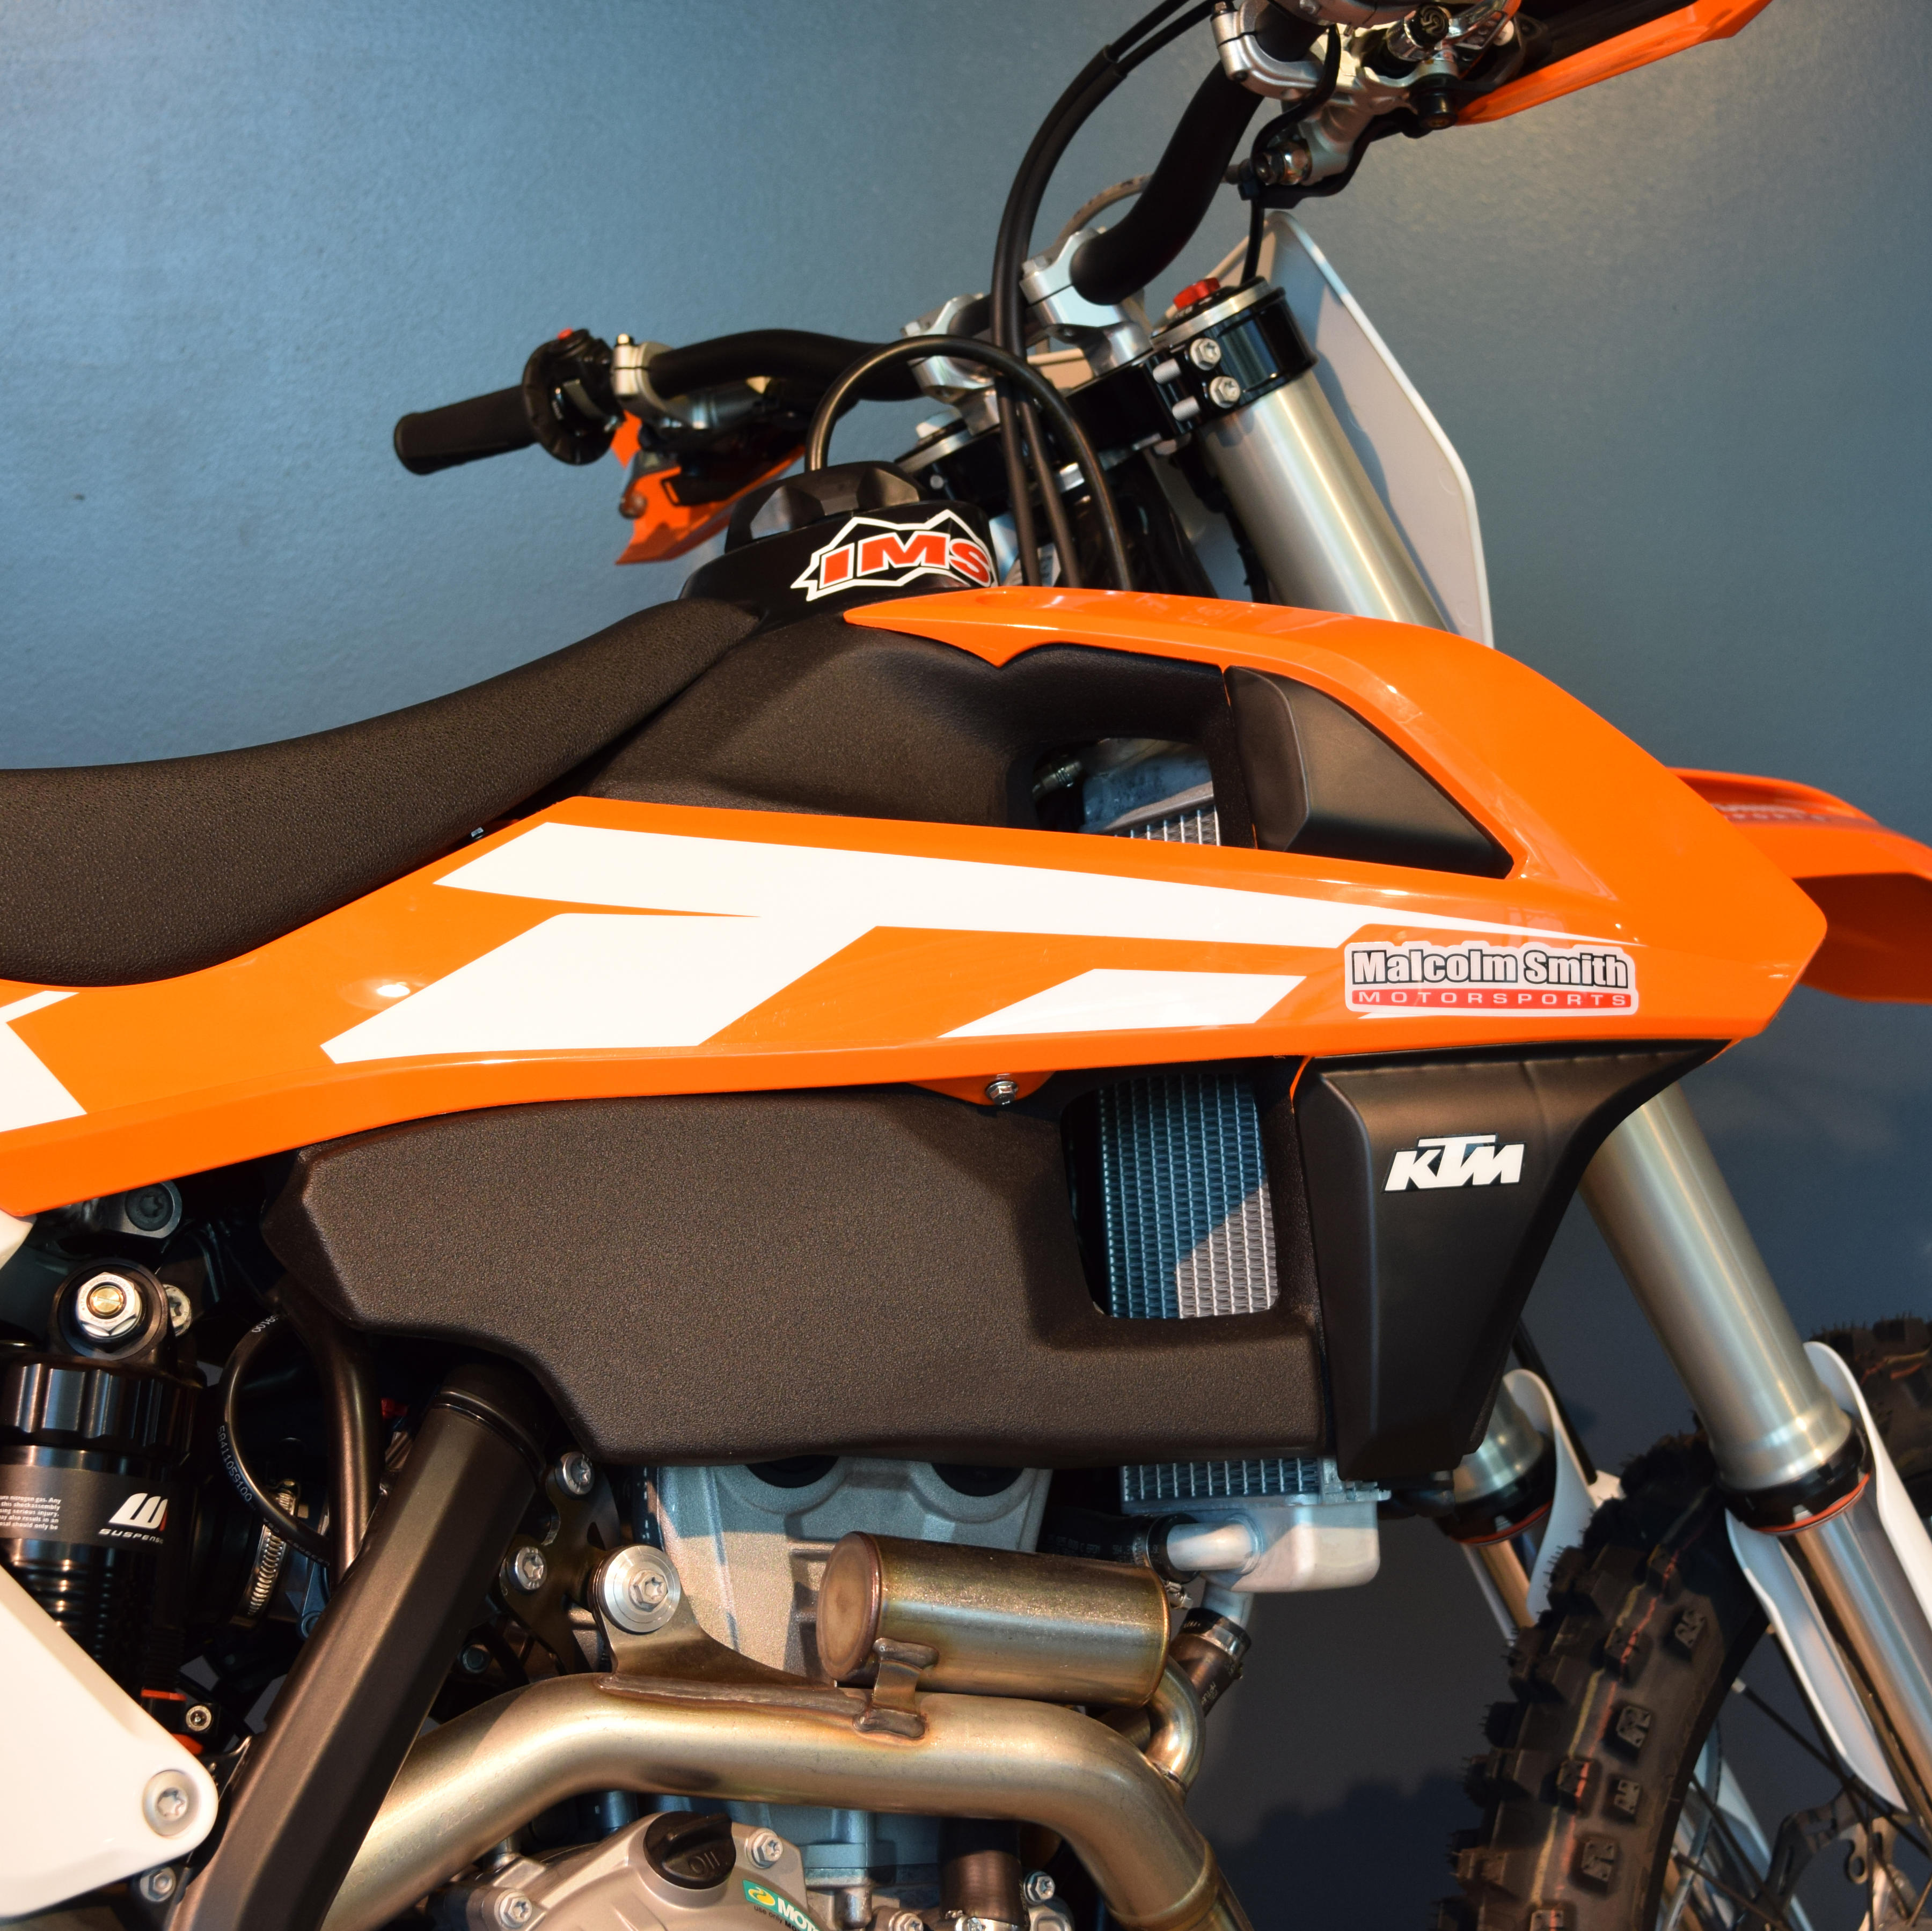 Large Capacity Fuel Tank Black 4.5 Gallon - For 17-19 KTM 450/500 EXCF - Click Image to Close